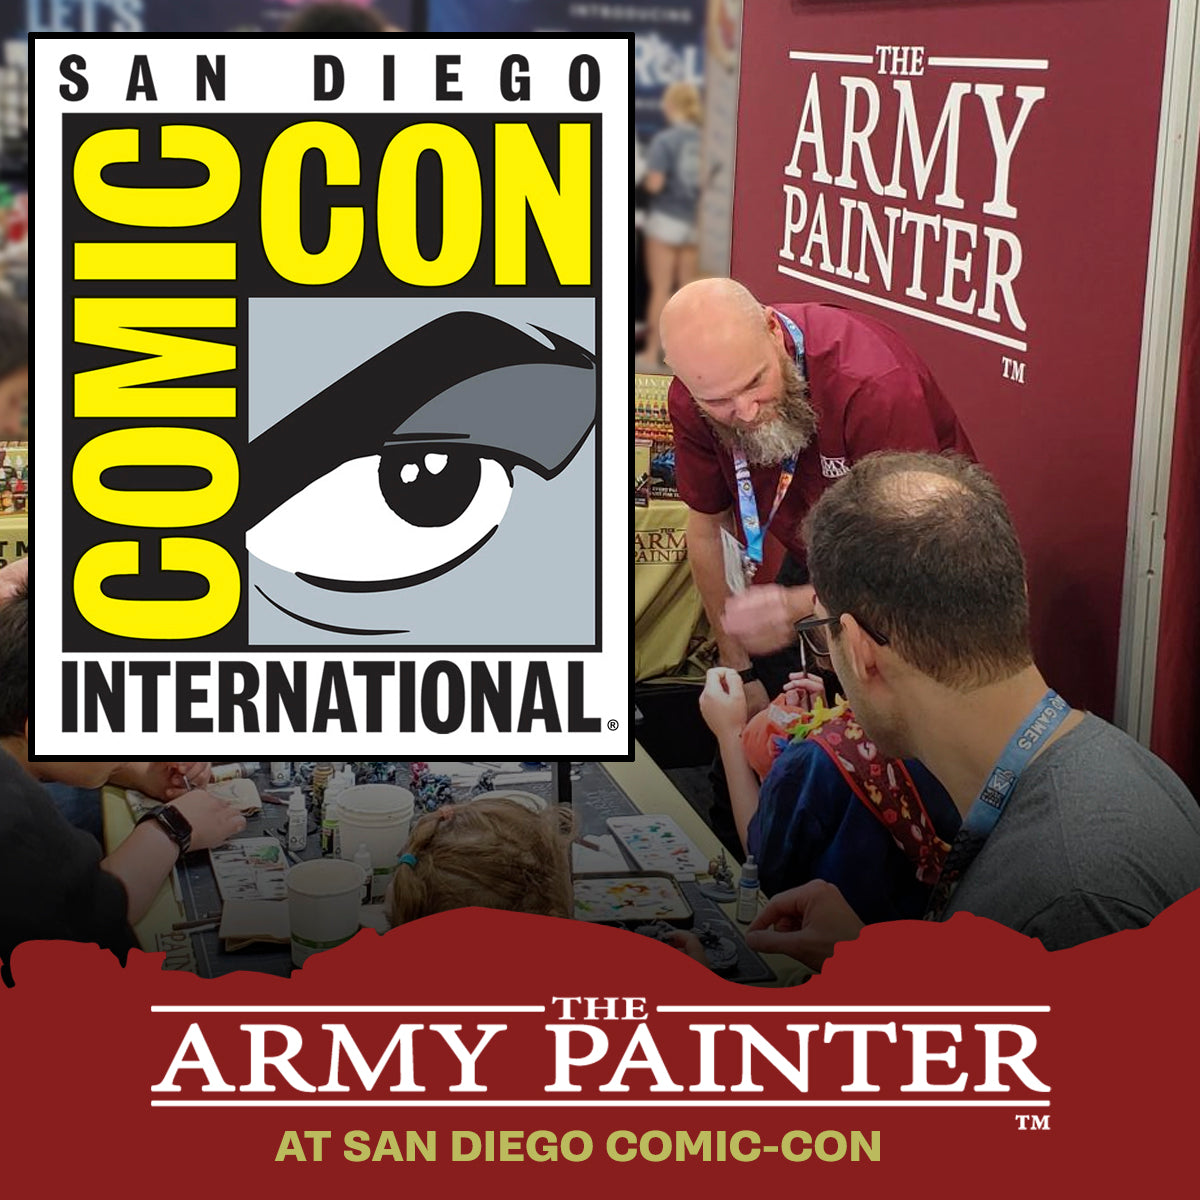 The Army Painter at the San Diego Comic-Con!